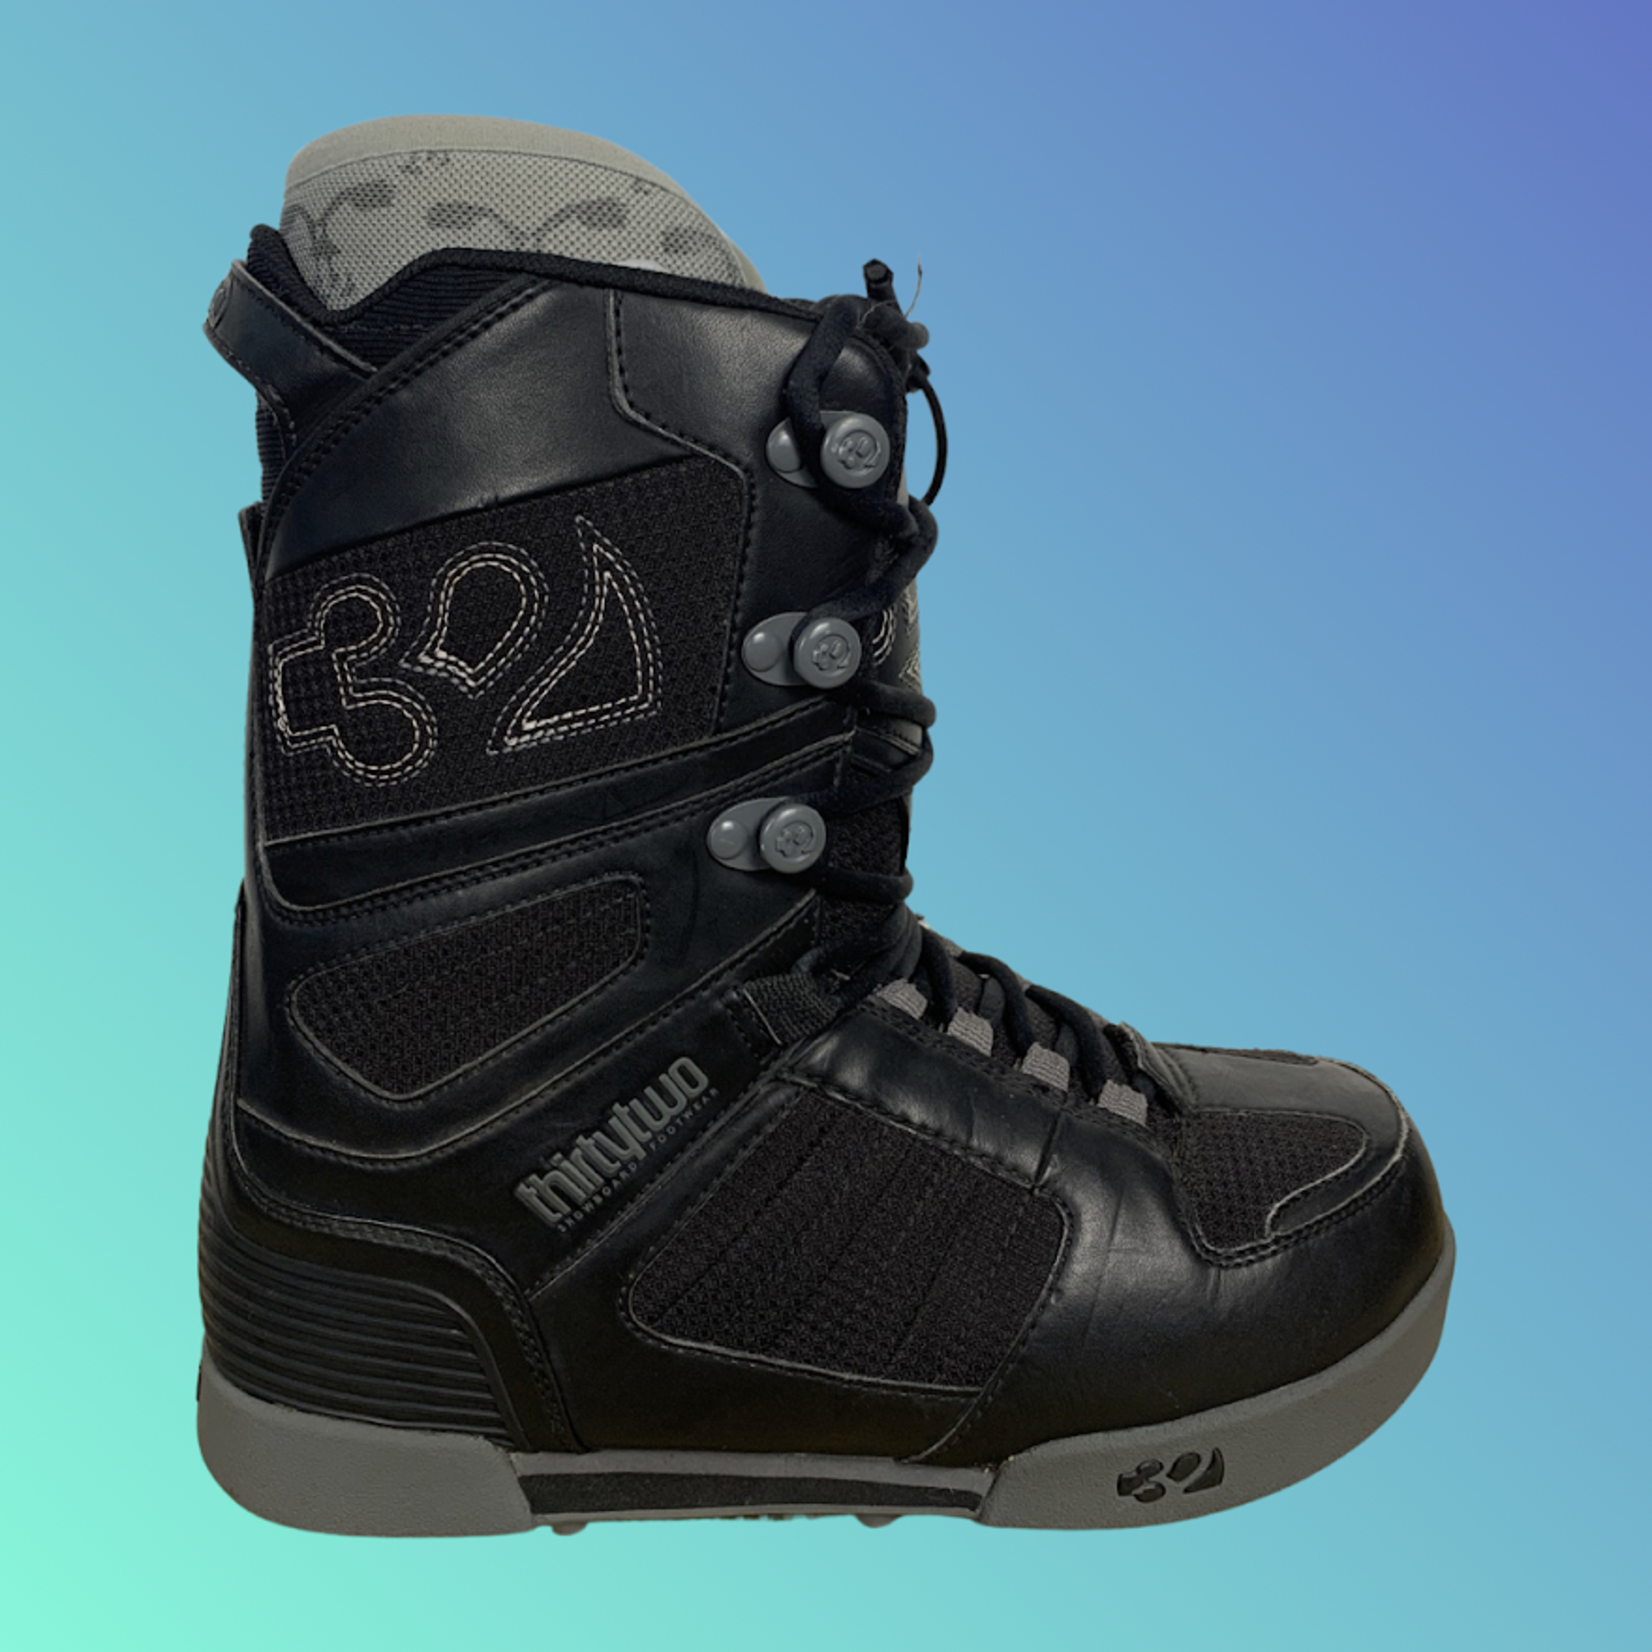 ThirtyTwo ThirtyTwo Prion Snowboard Boots, SOLD AS IS, NO REFUNDS OR EXCHANGES